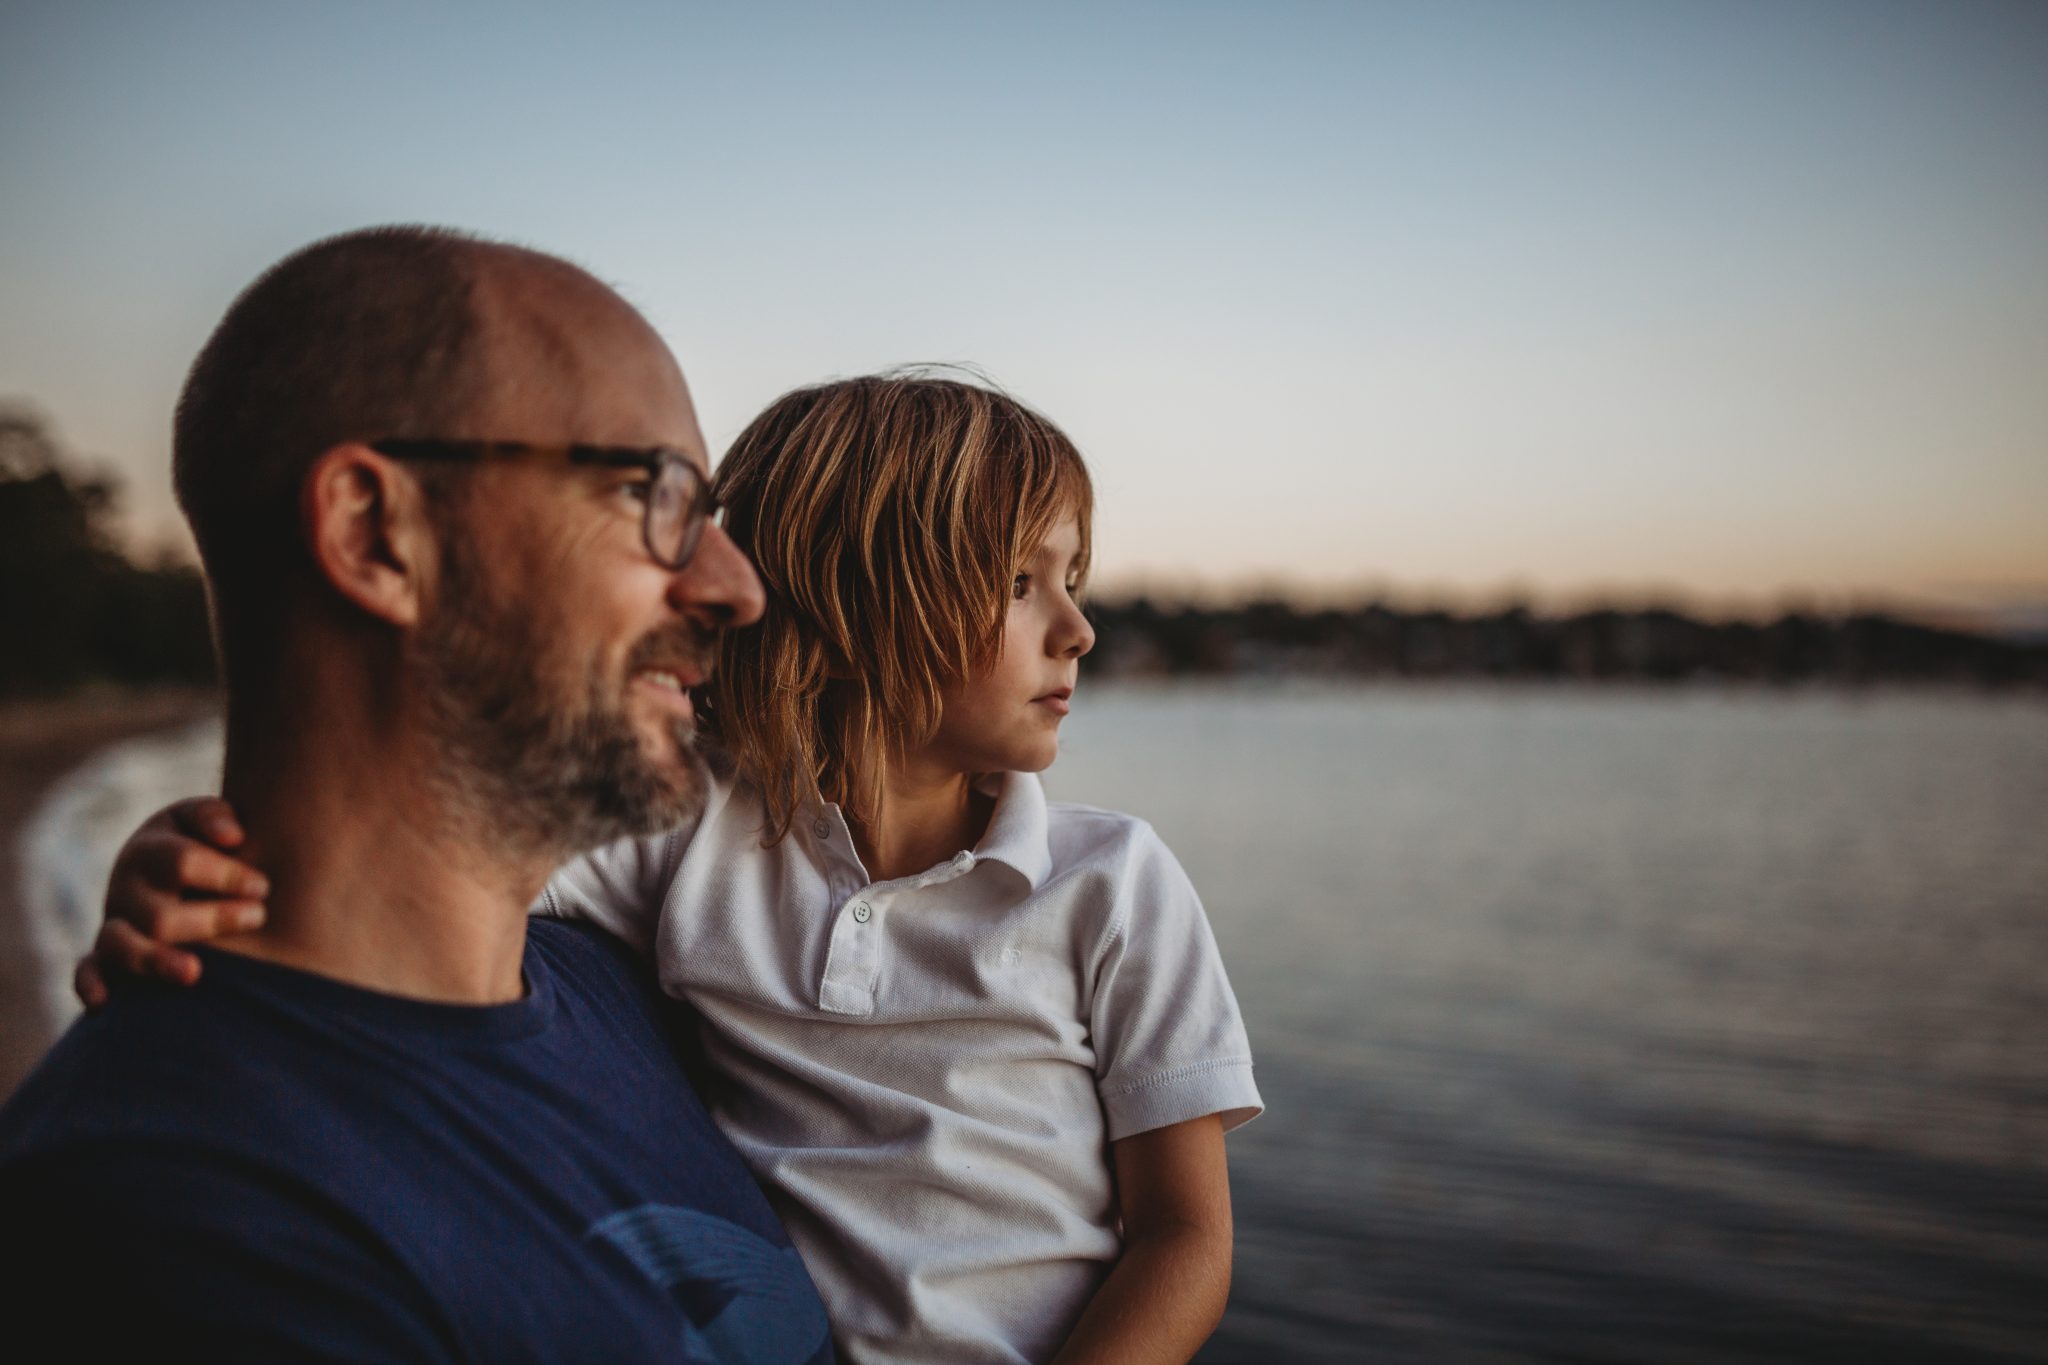 Young boy and father looking out to Lake Macquarie at sunset